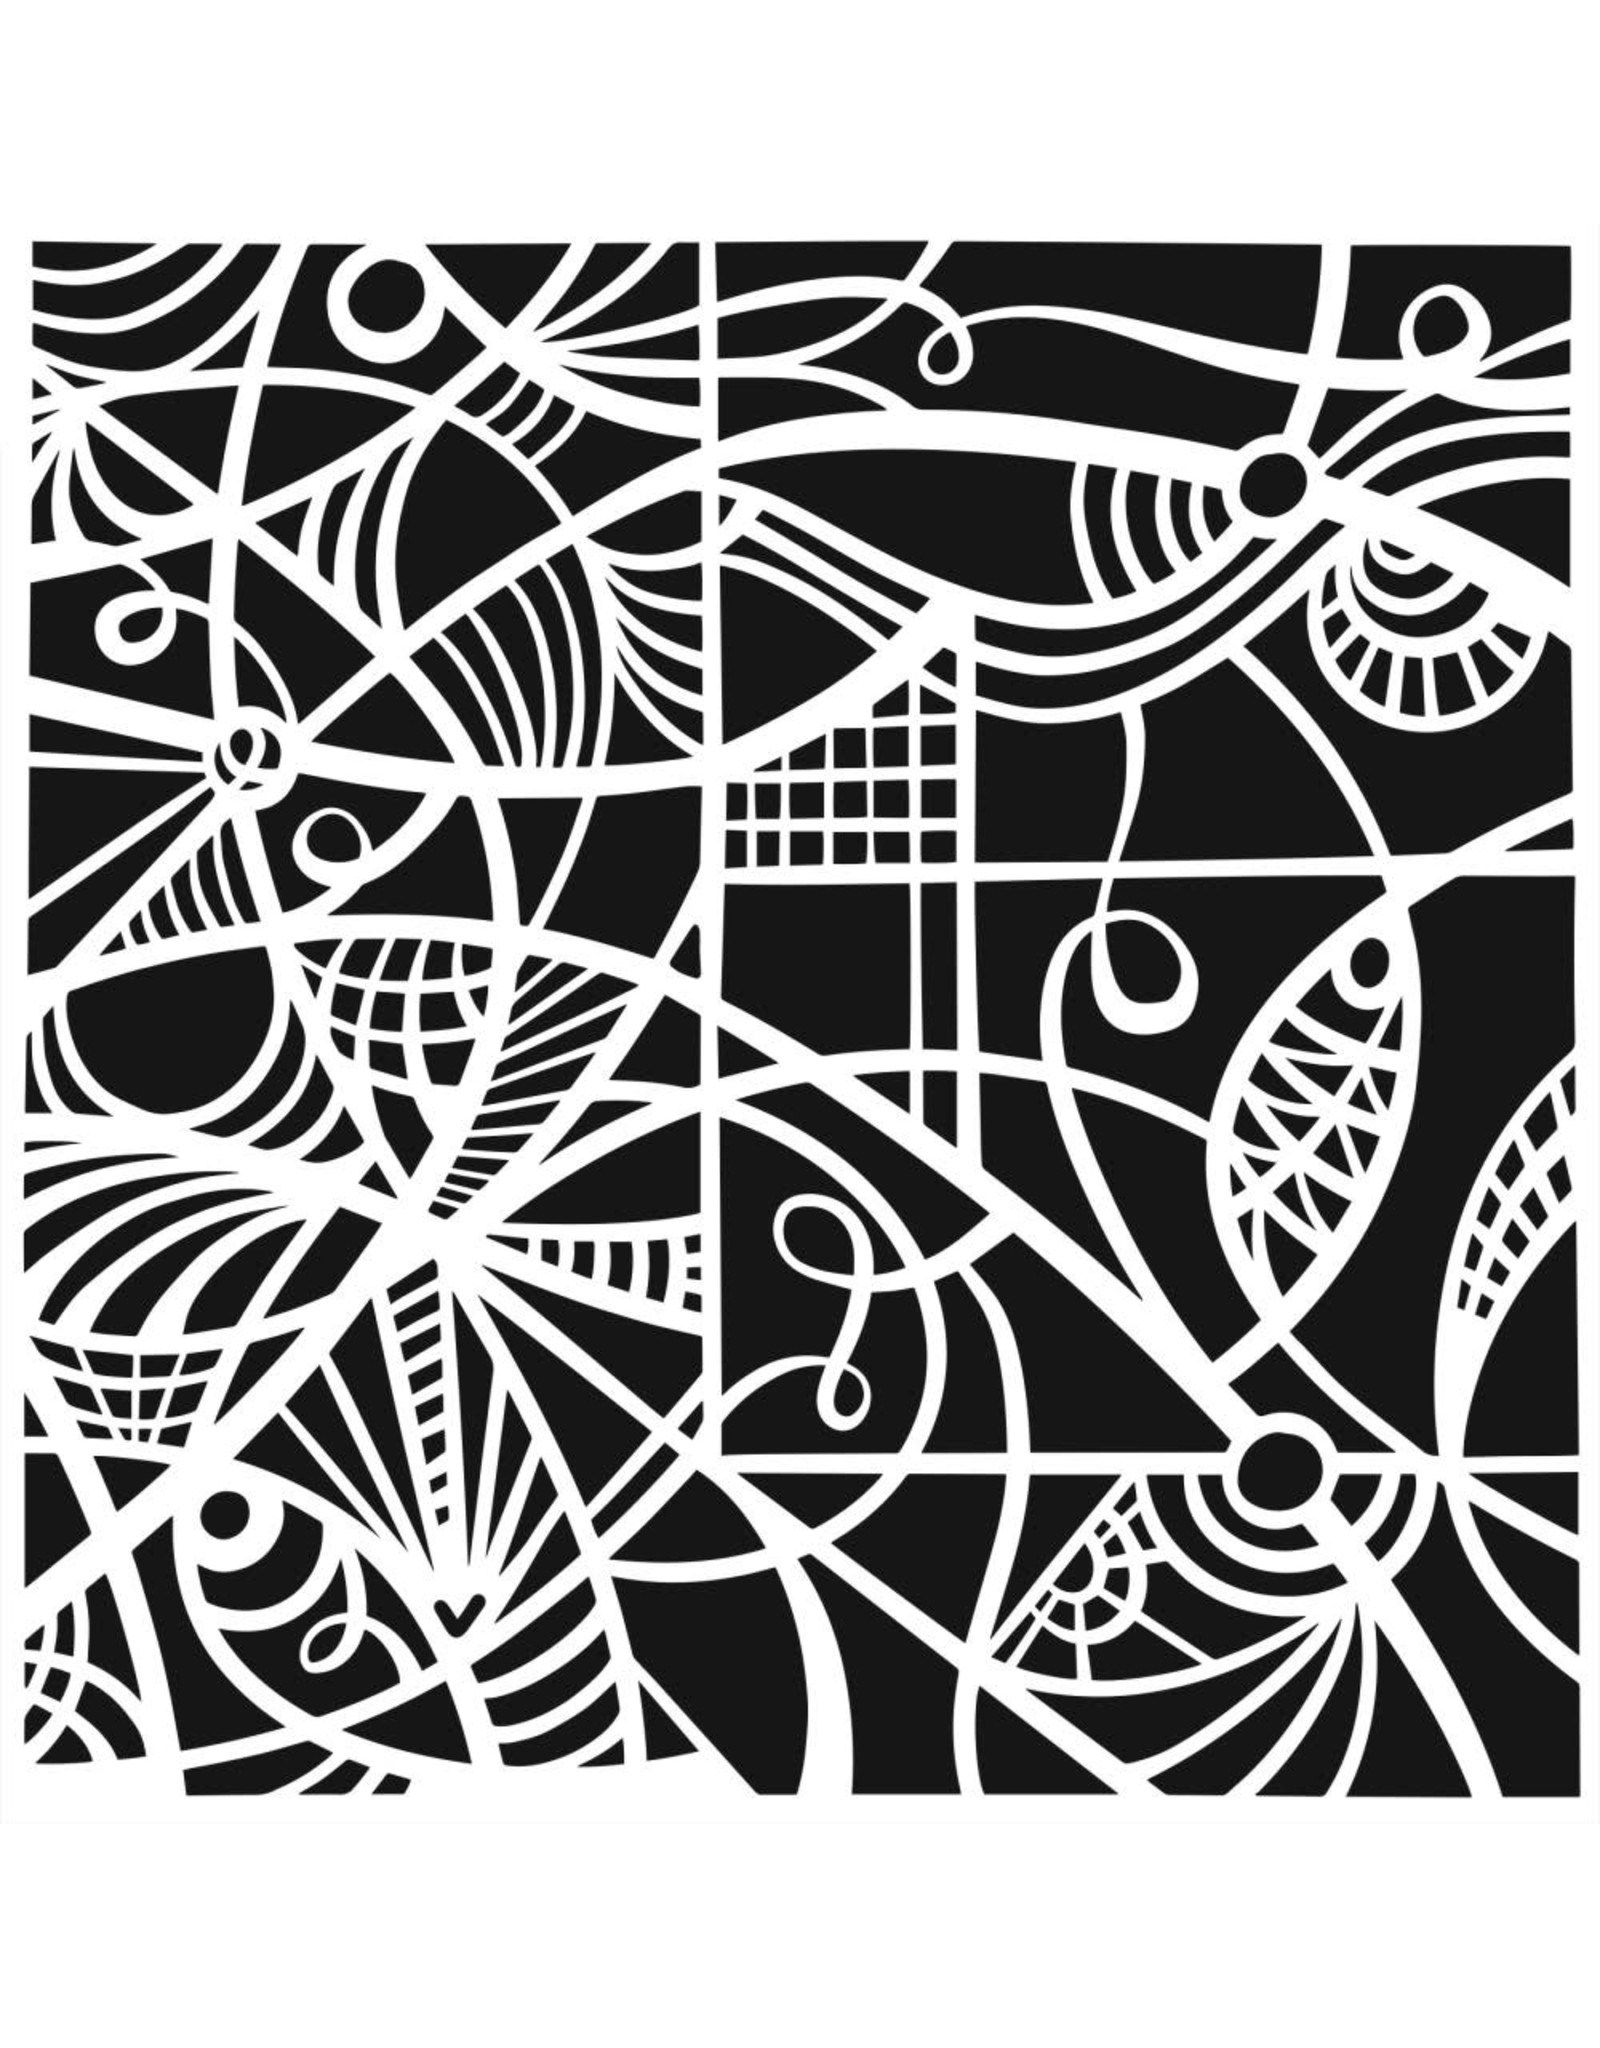 CRAFTERS WORKSHOP THE CRAFTERS WORKSHOP CATHLIN LARSEN PATTERNED GLASS 6x6 STENCIL